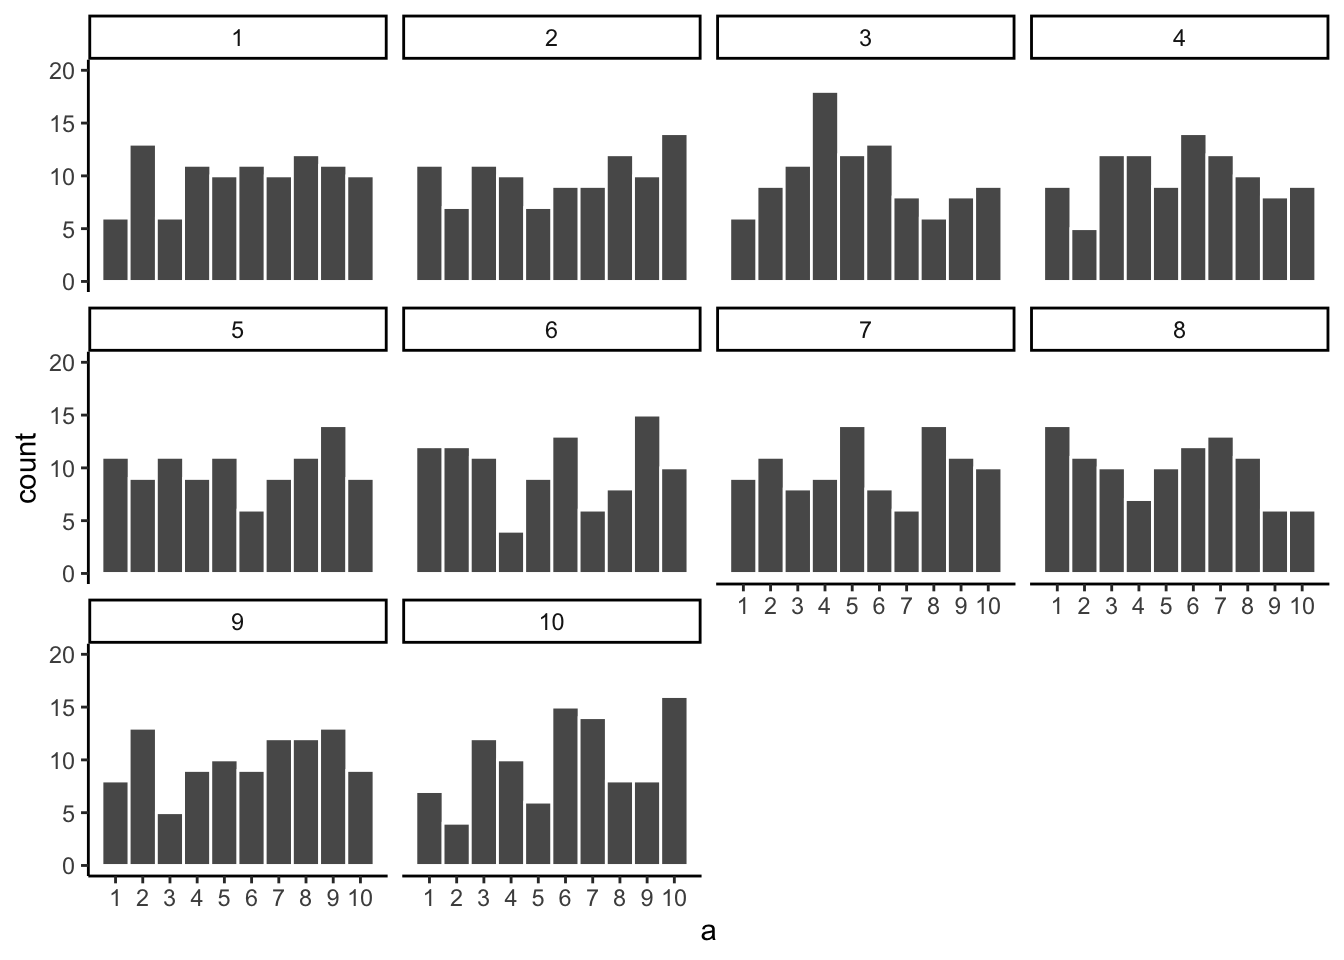 Histograms for different samples from a uniform distribution. Sample-size = 100 for each sample.